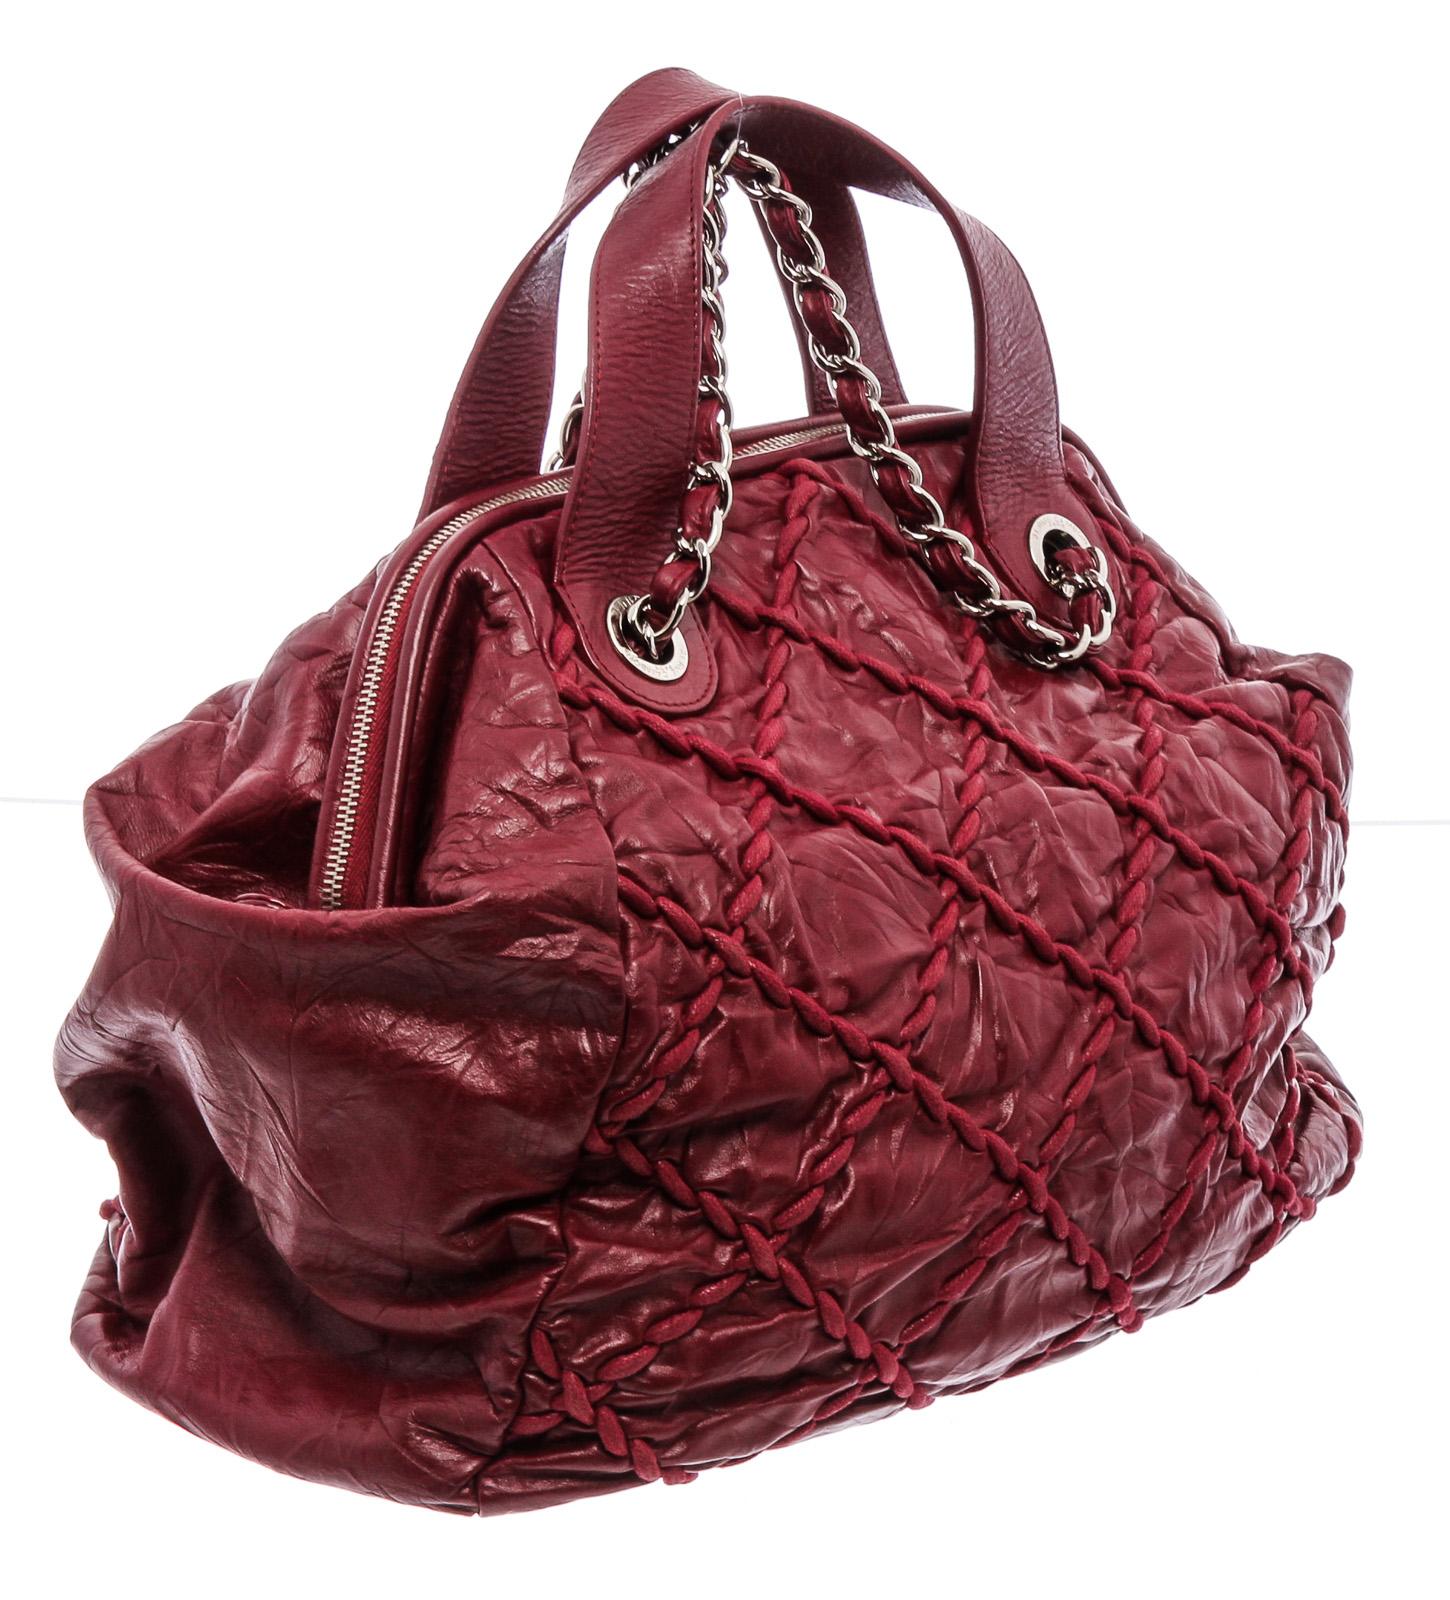 Brown Chanel Red Distressed Leather Ultra Stitch Bowler Bag